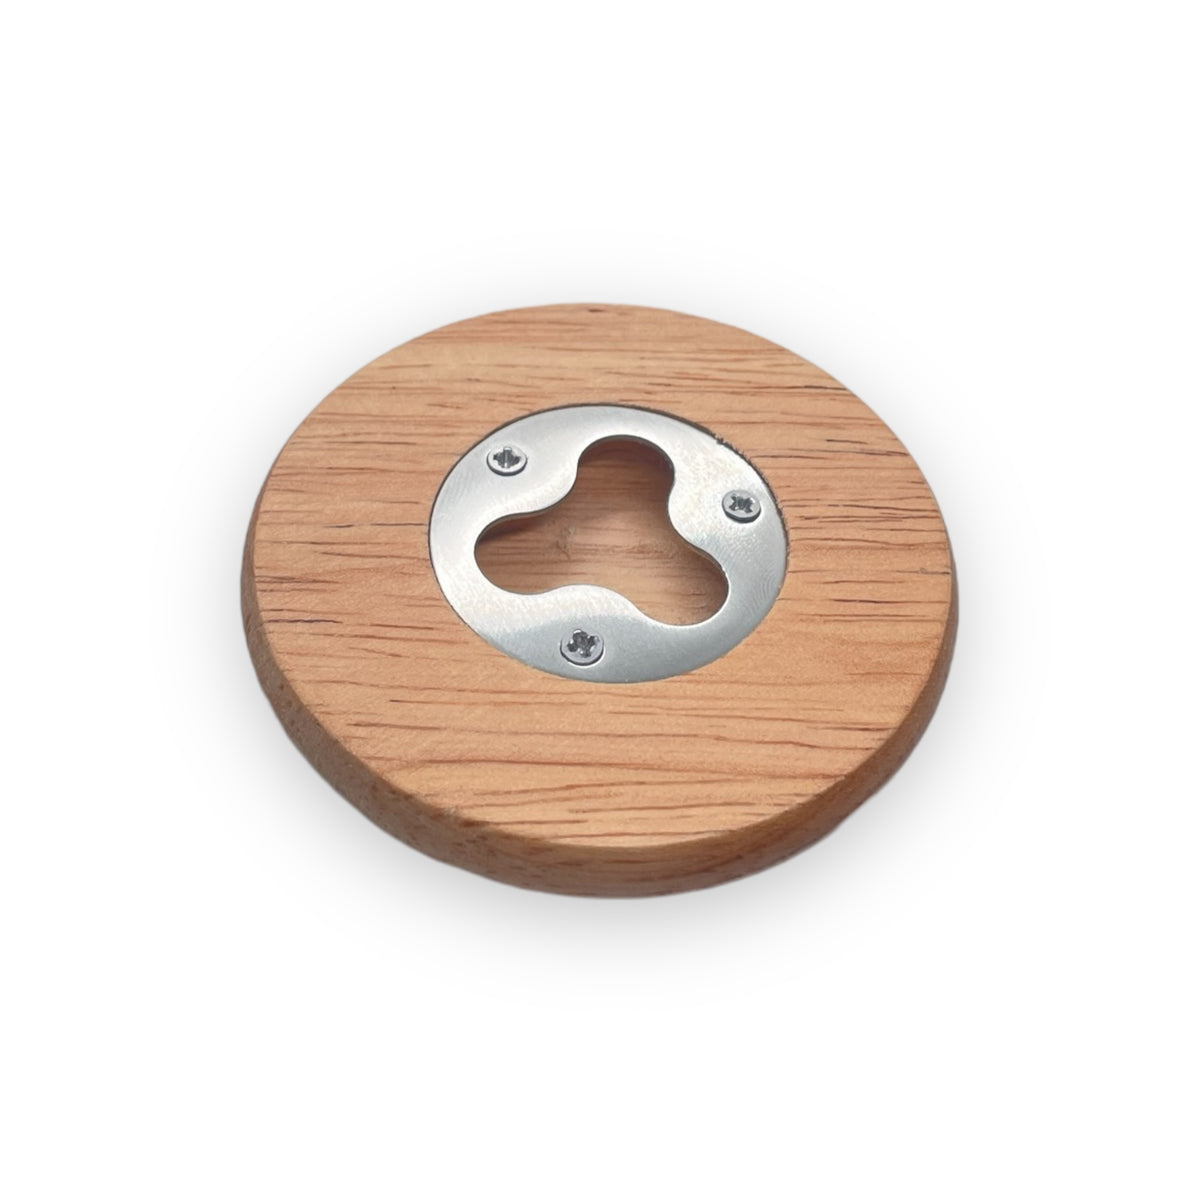 Wooden coaster with bottle opener